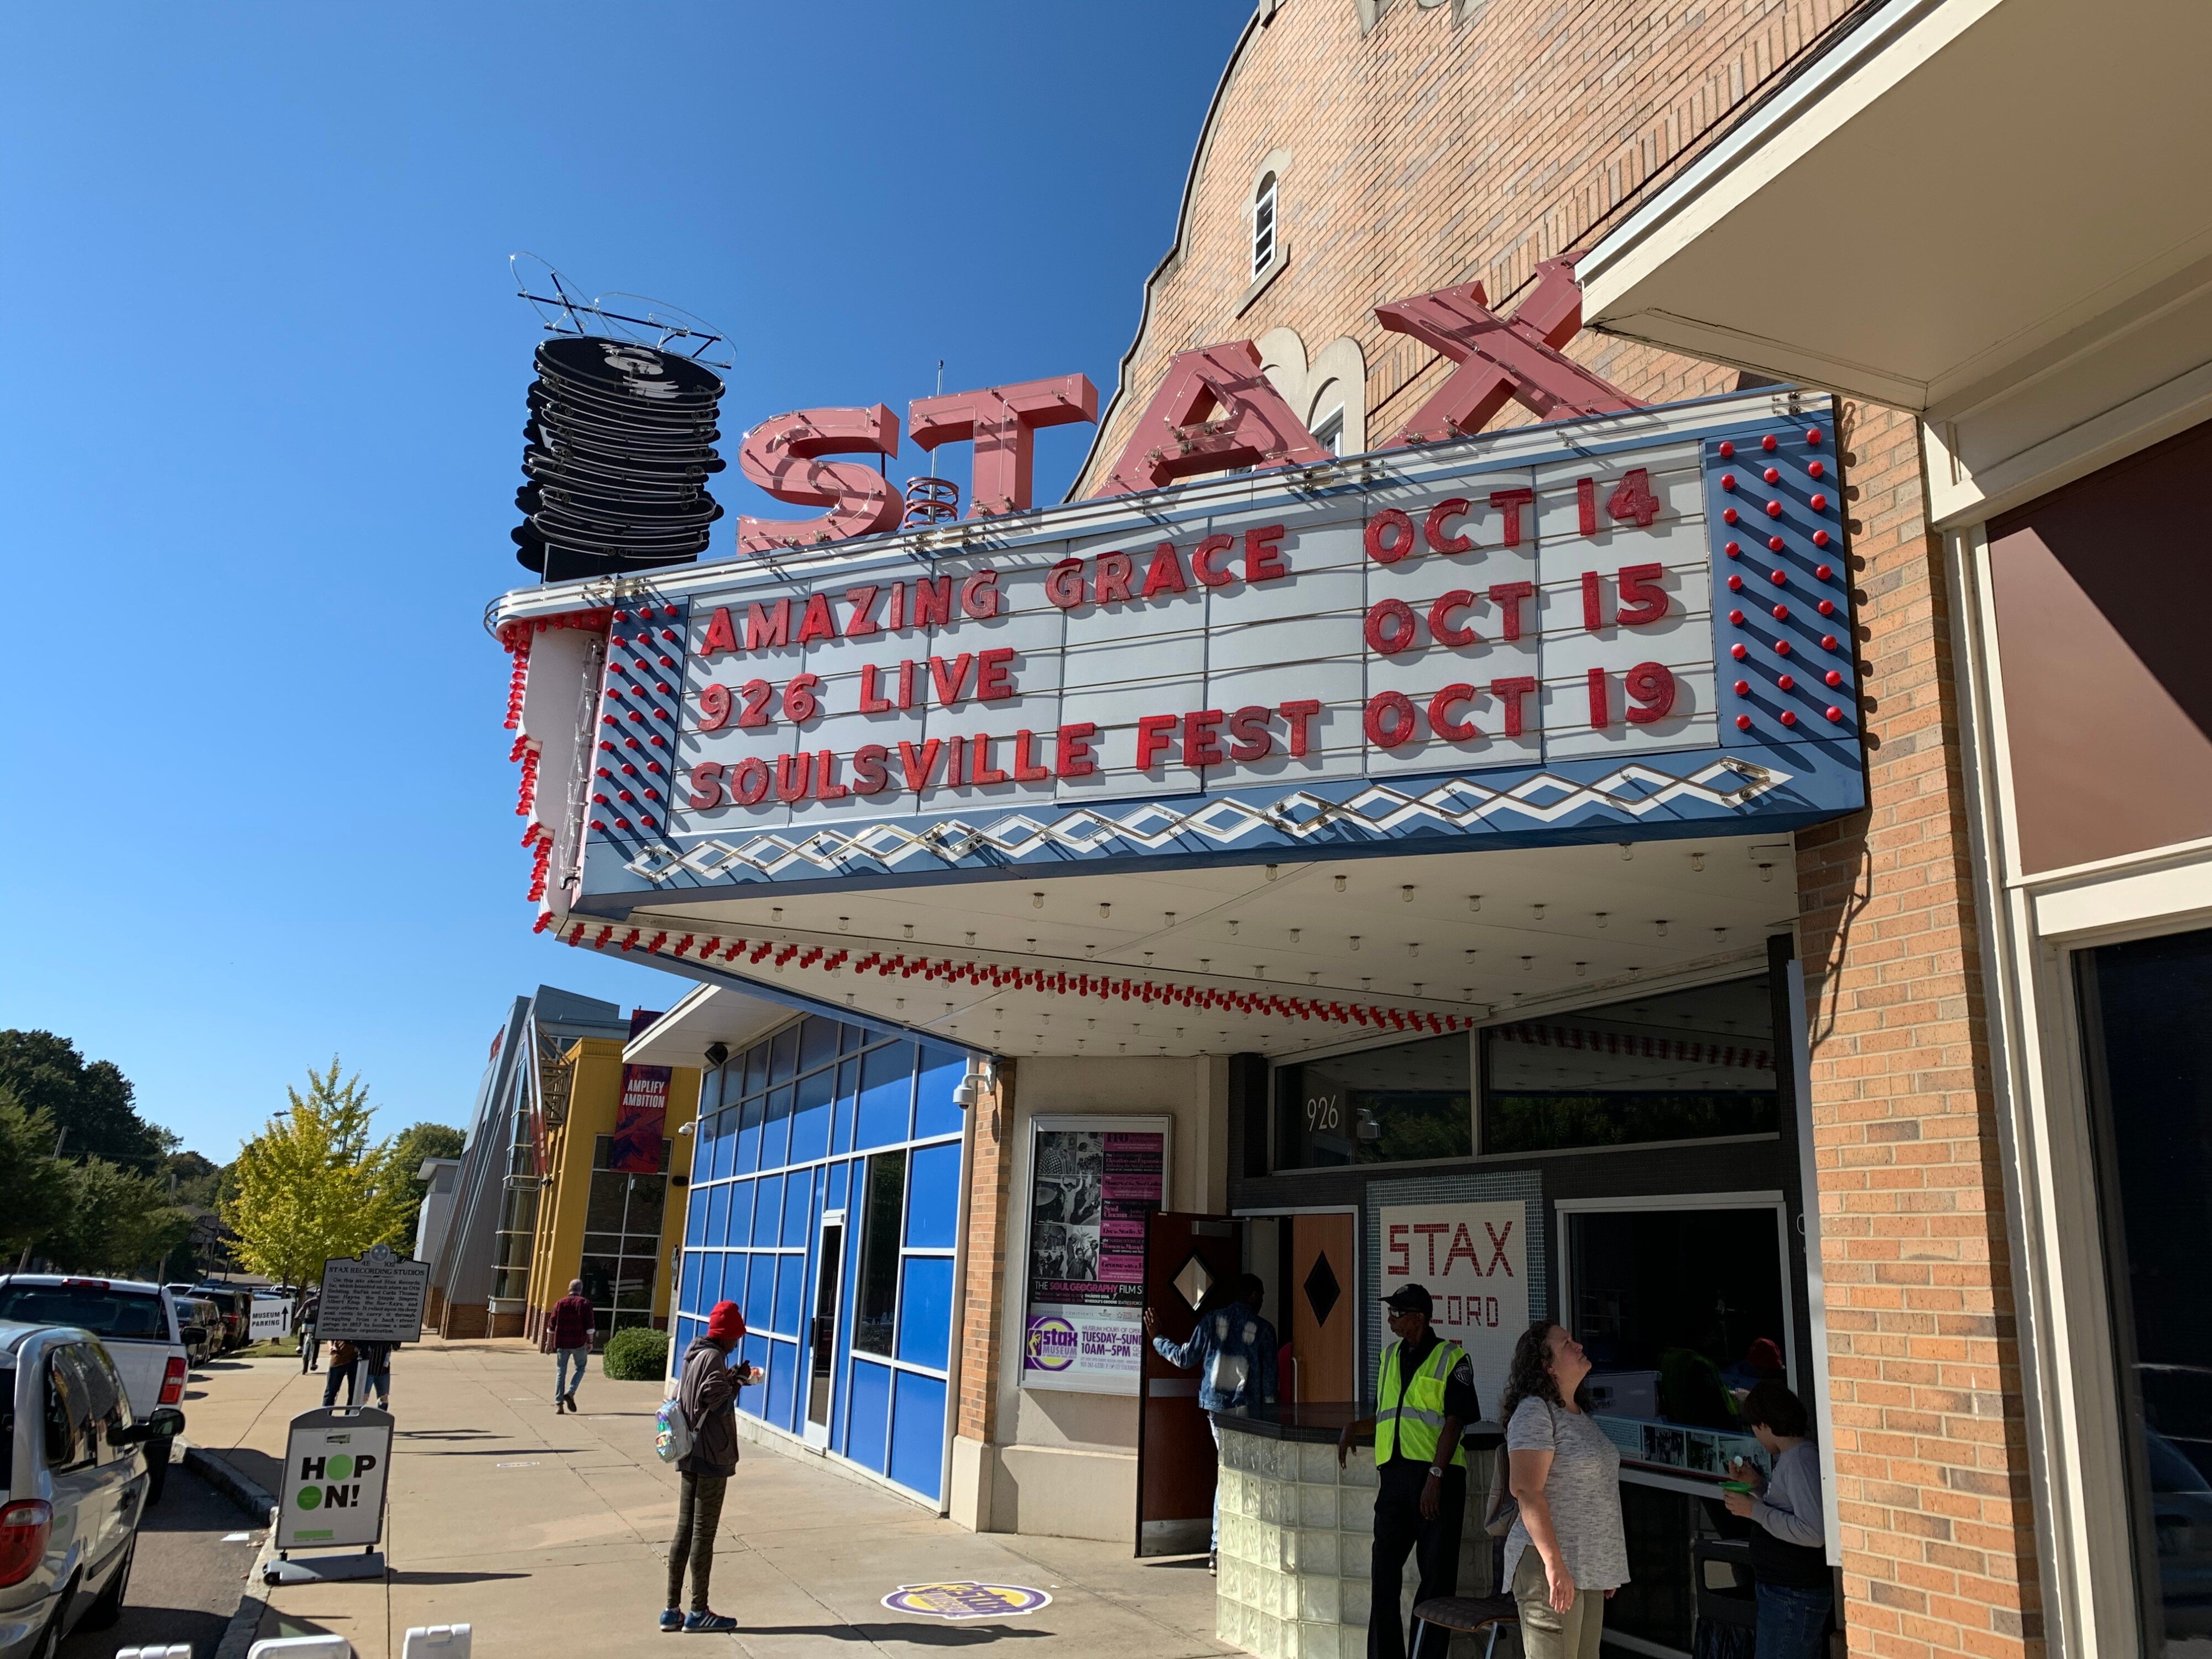 The Stax Museum of American Soul Music offered free admission to attendees of the 2019 Soulsville USA Festival. (Kim and Jim Coleman)